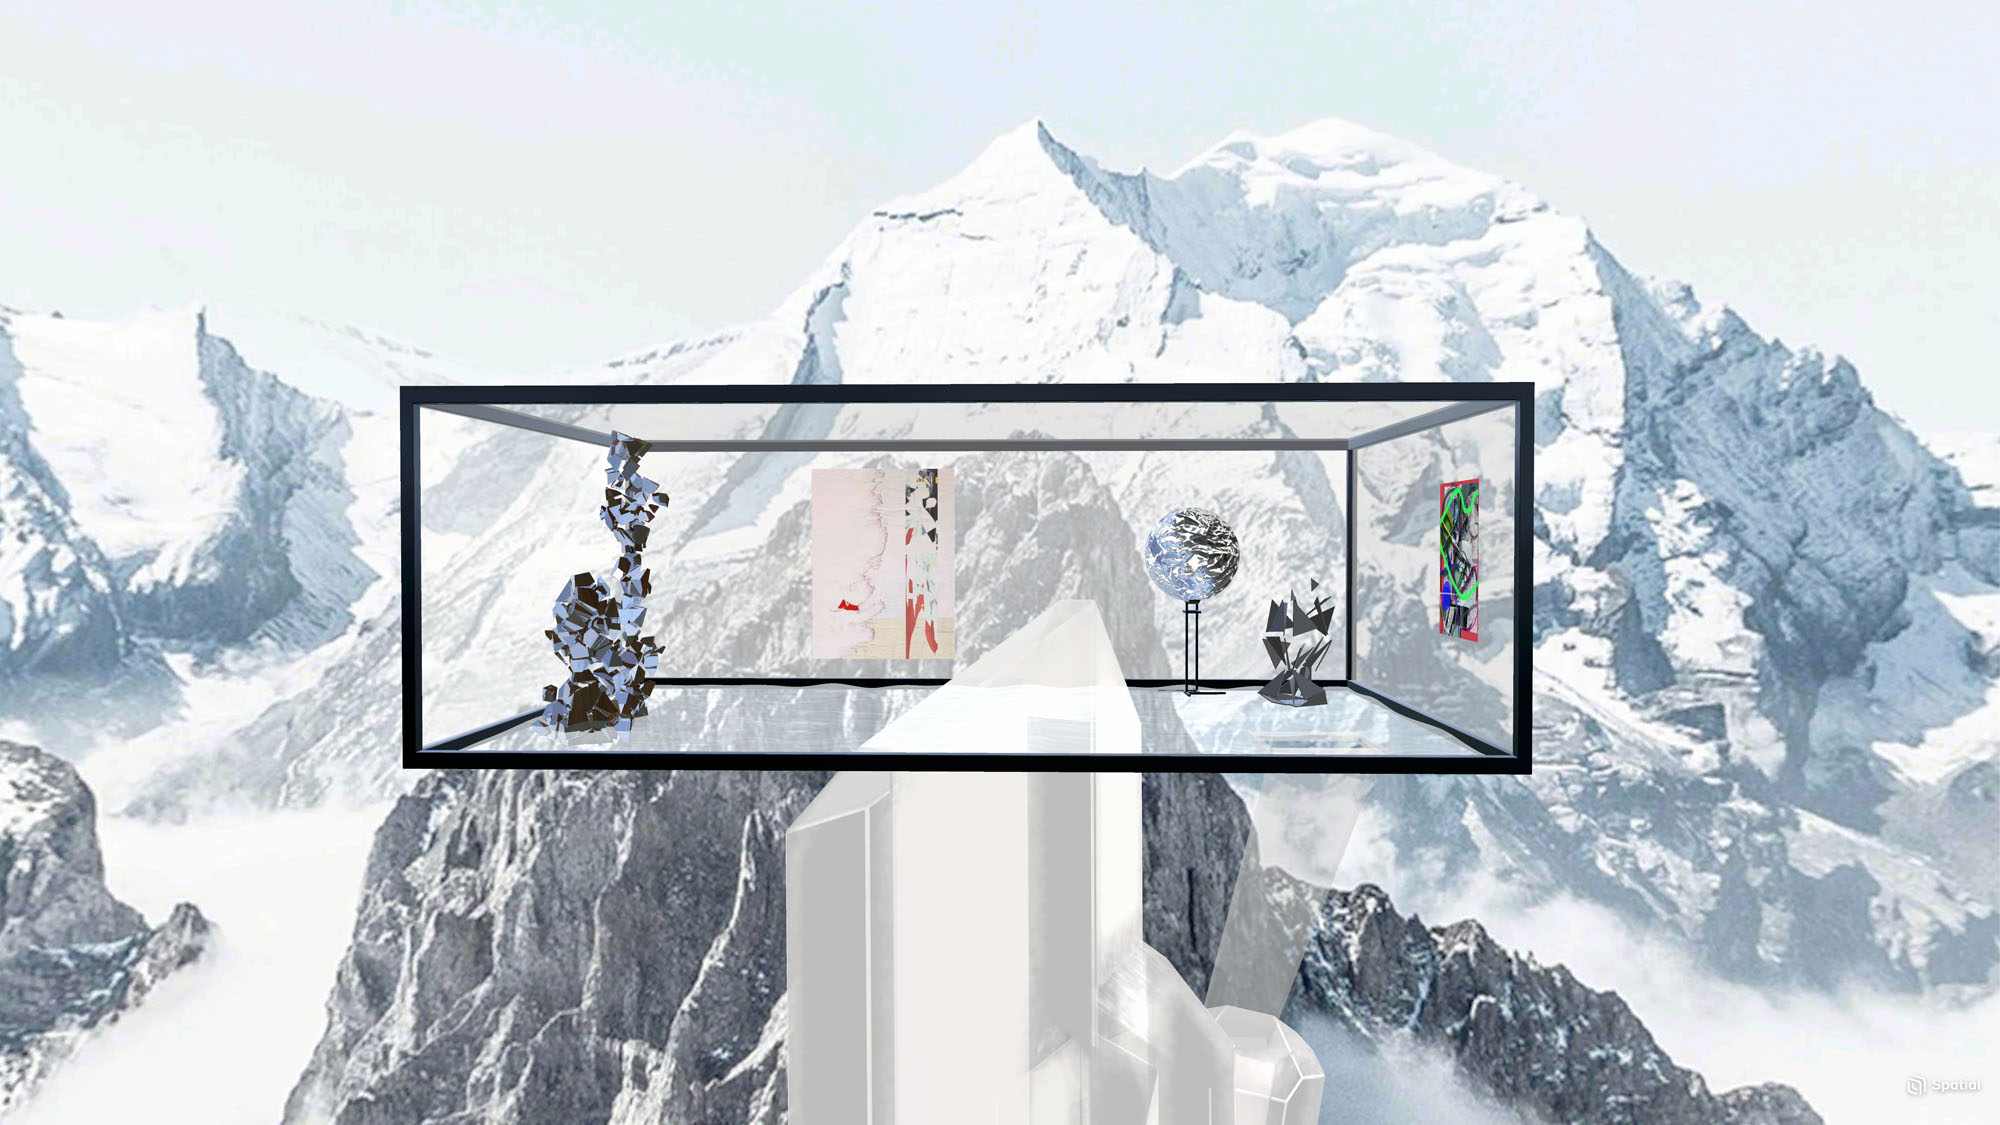 a rendering of a virtual environment shows a transparent cube on top of a pile of crystals with mountains in the background